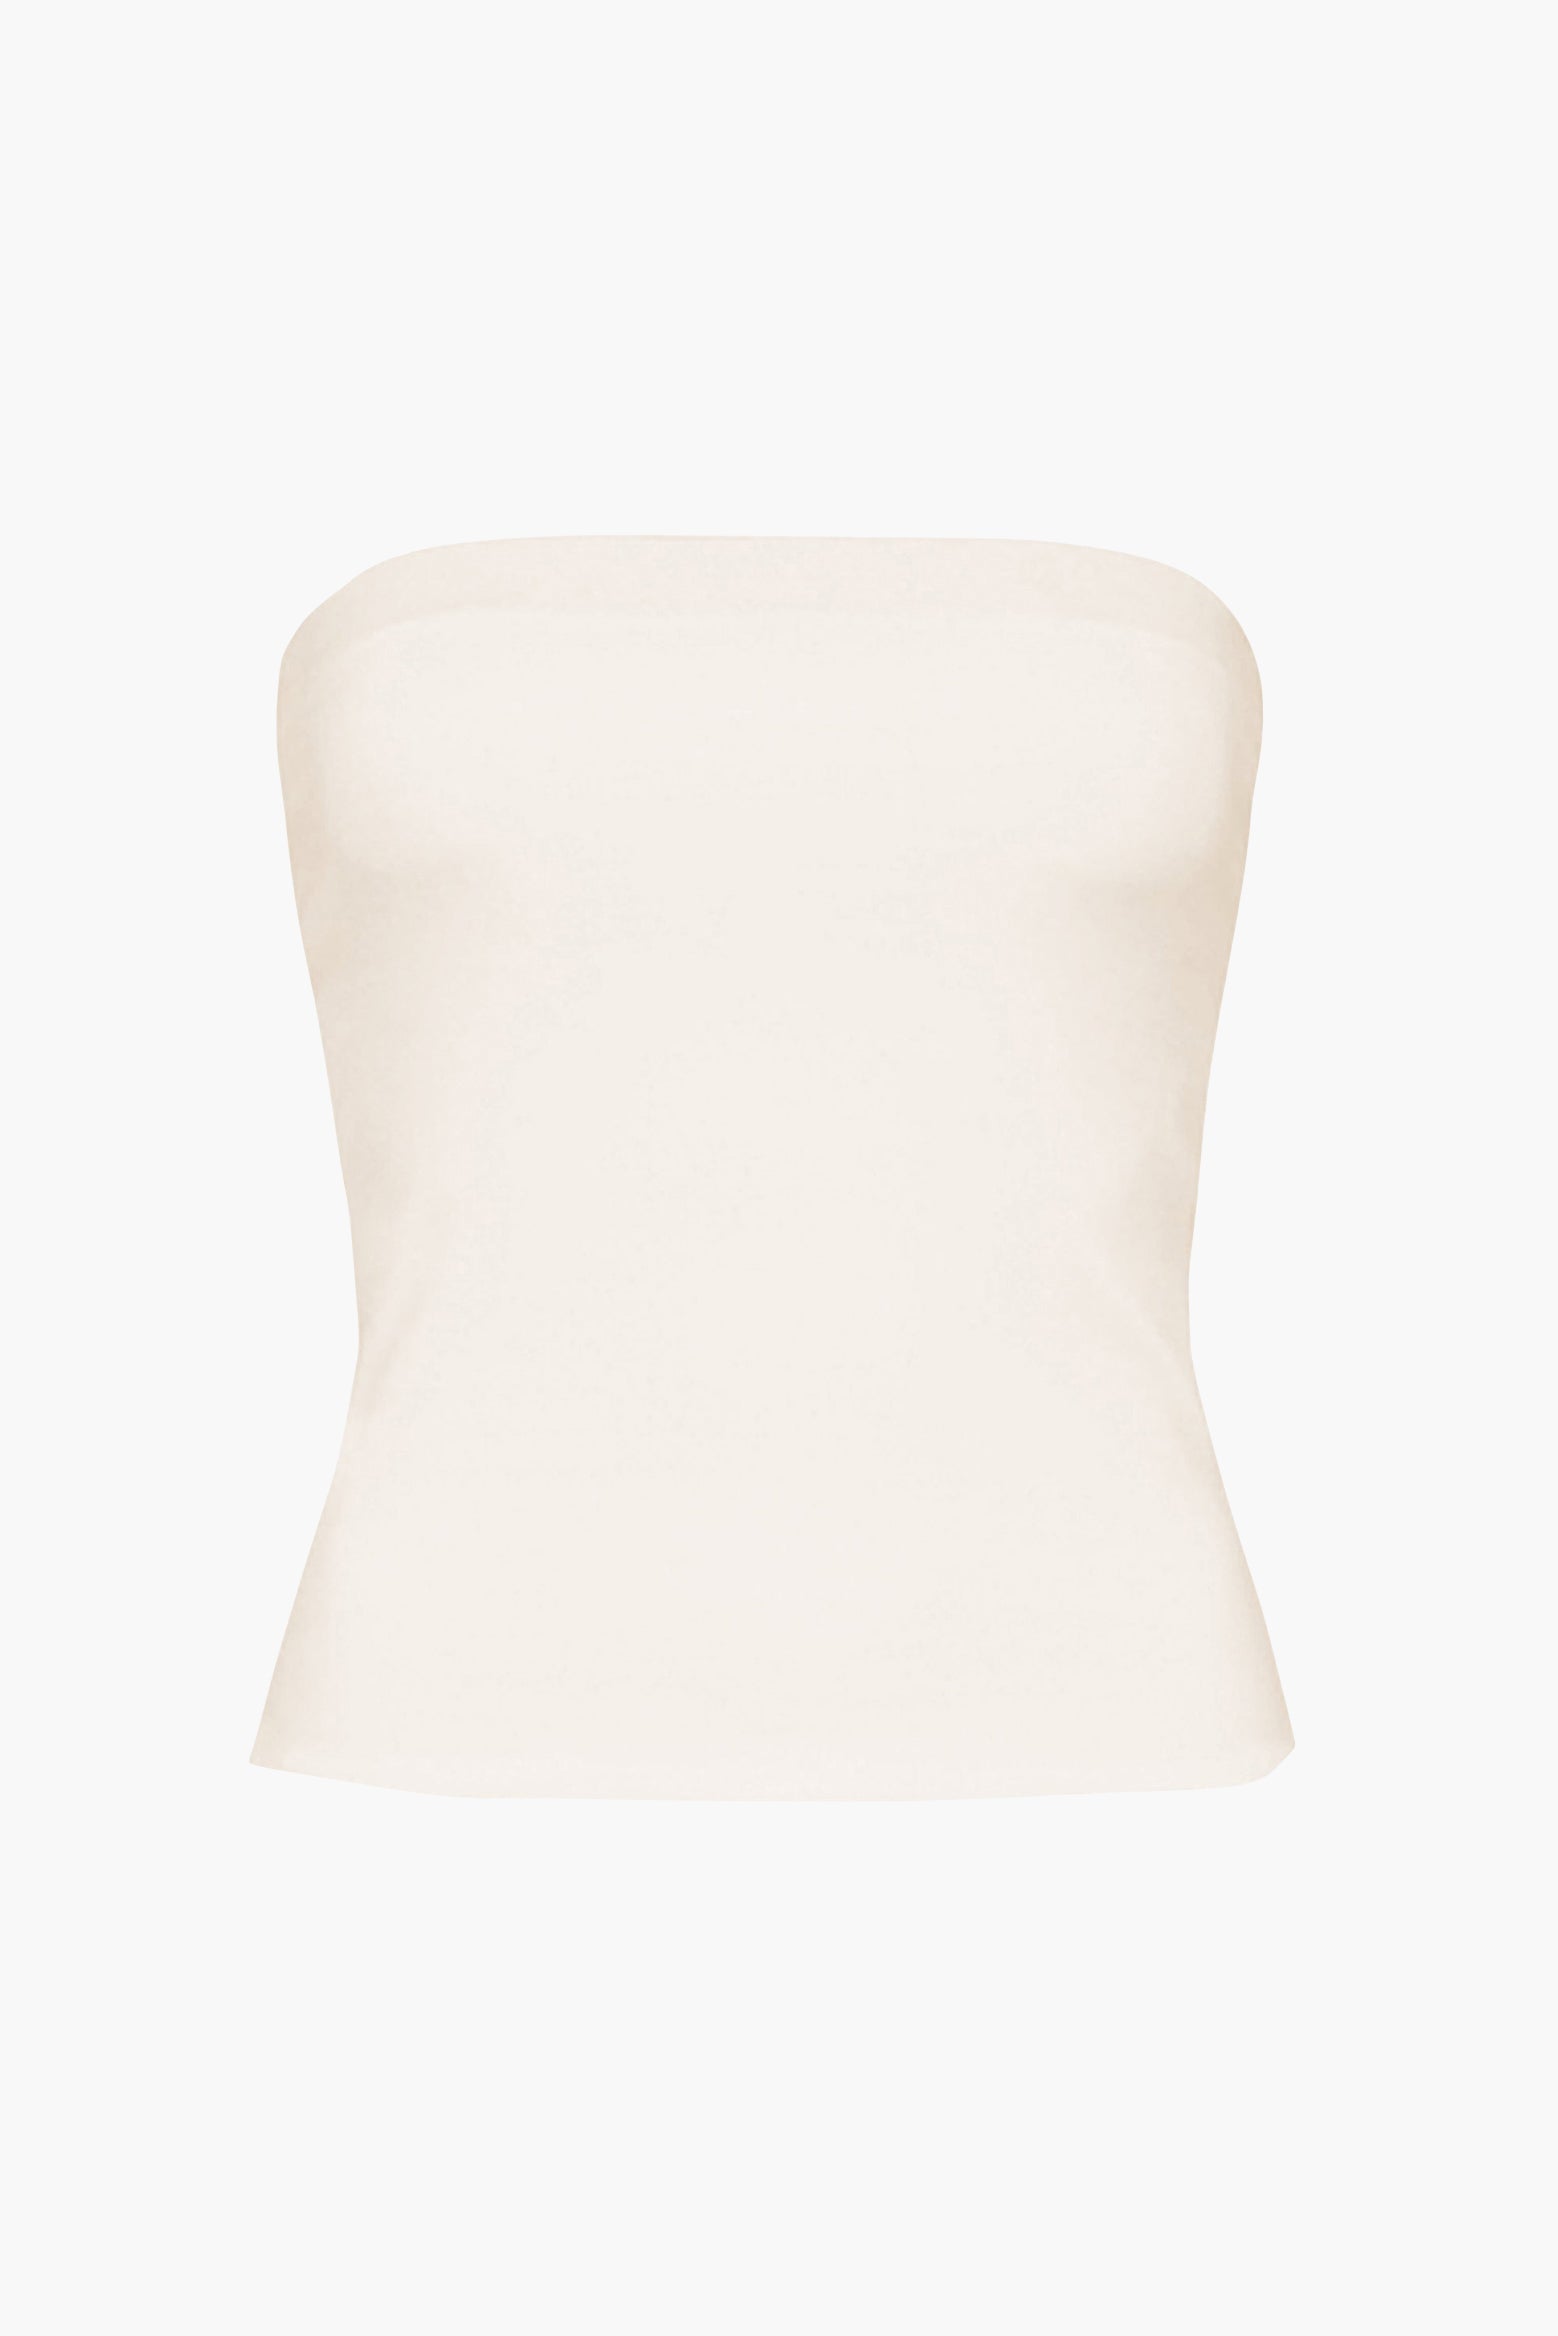 Esse Strapless Top in Crema available at TNT The New Trend Australia.